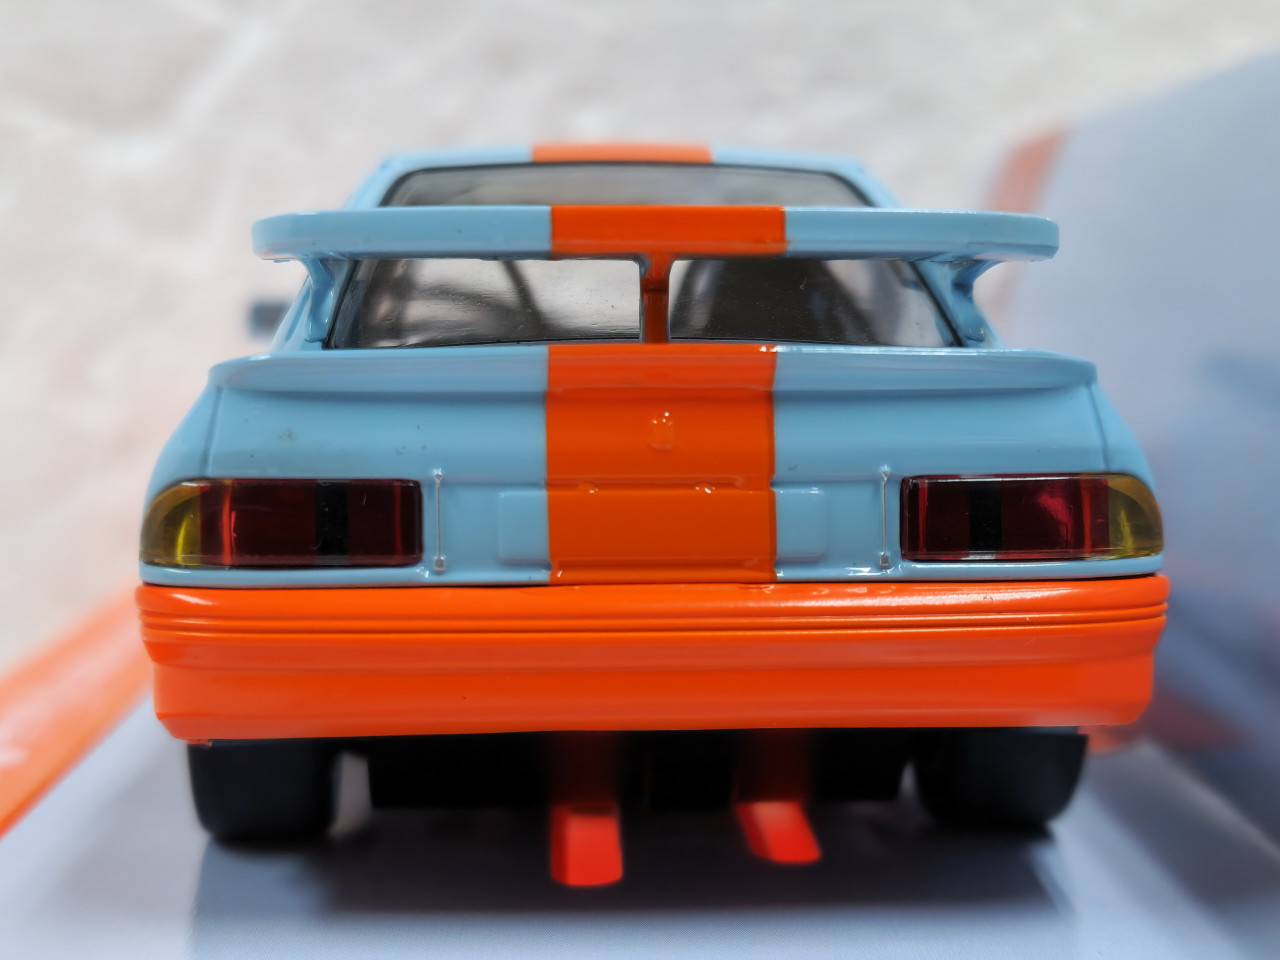 C4034 Scalextric Ford GT GTE Gulf Edition, #19 1:32 Slot Car *DPR* - Great  Traditions